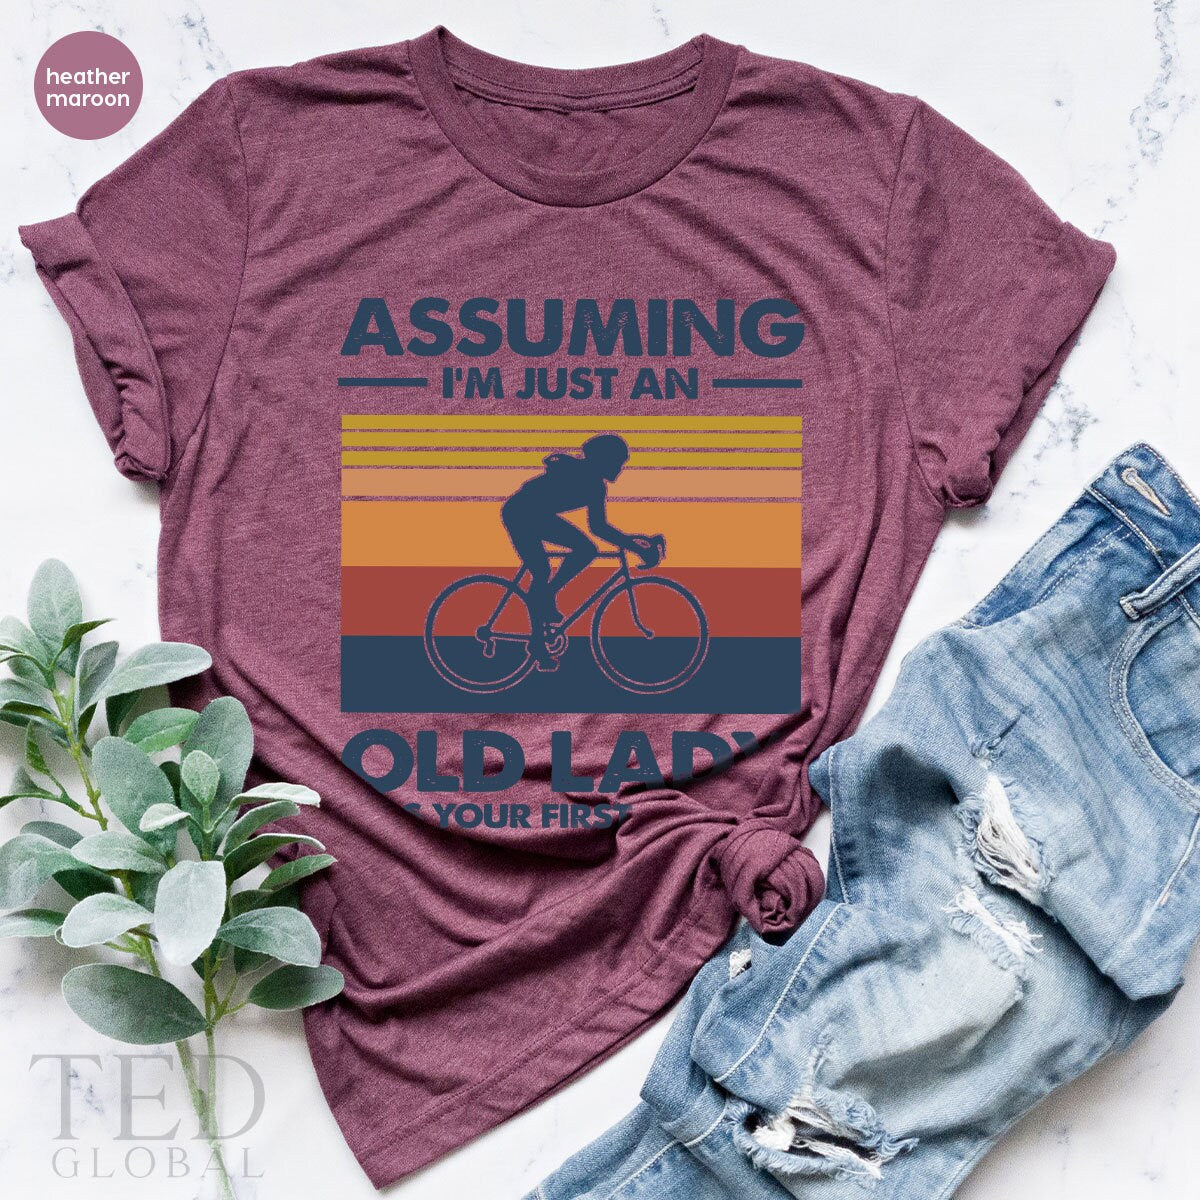 Funny Female Athletes Shirt, Woman On Bike T-Shirt, Bicycle T Shirt, Cycling Shirts, Cycling Mom Tee, Cycling Girl T-Shirt, Gift For Her - Fastdeliverytees.com